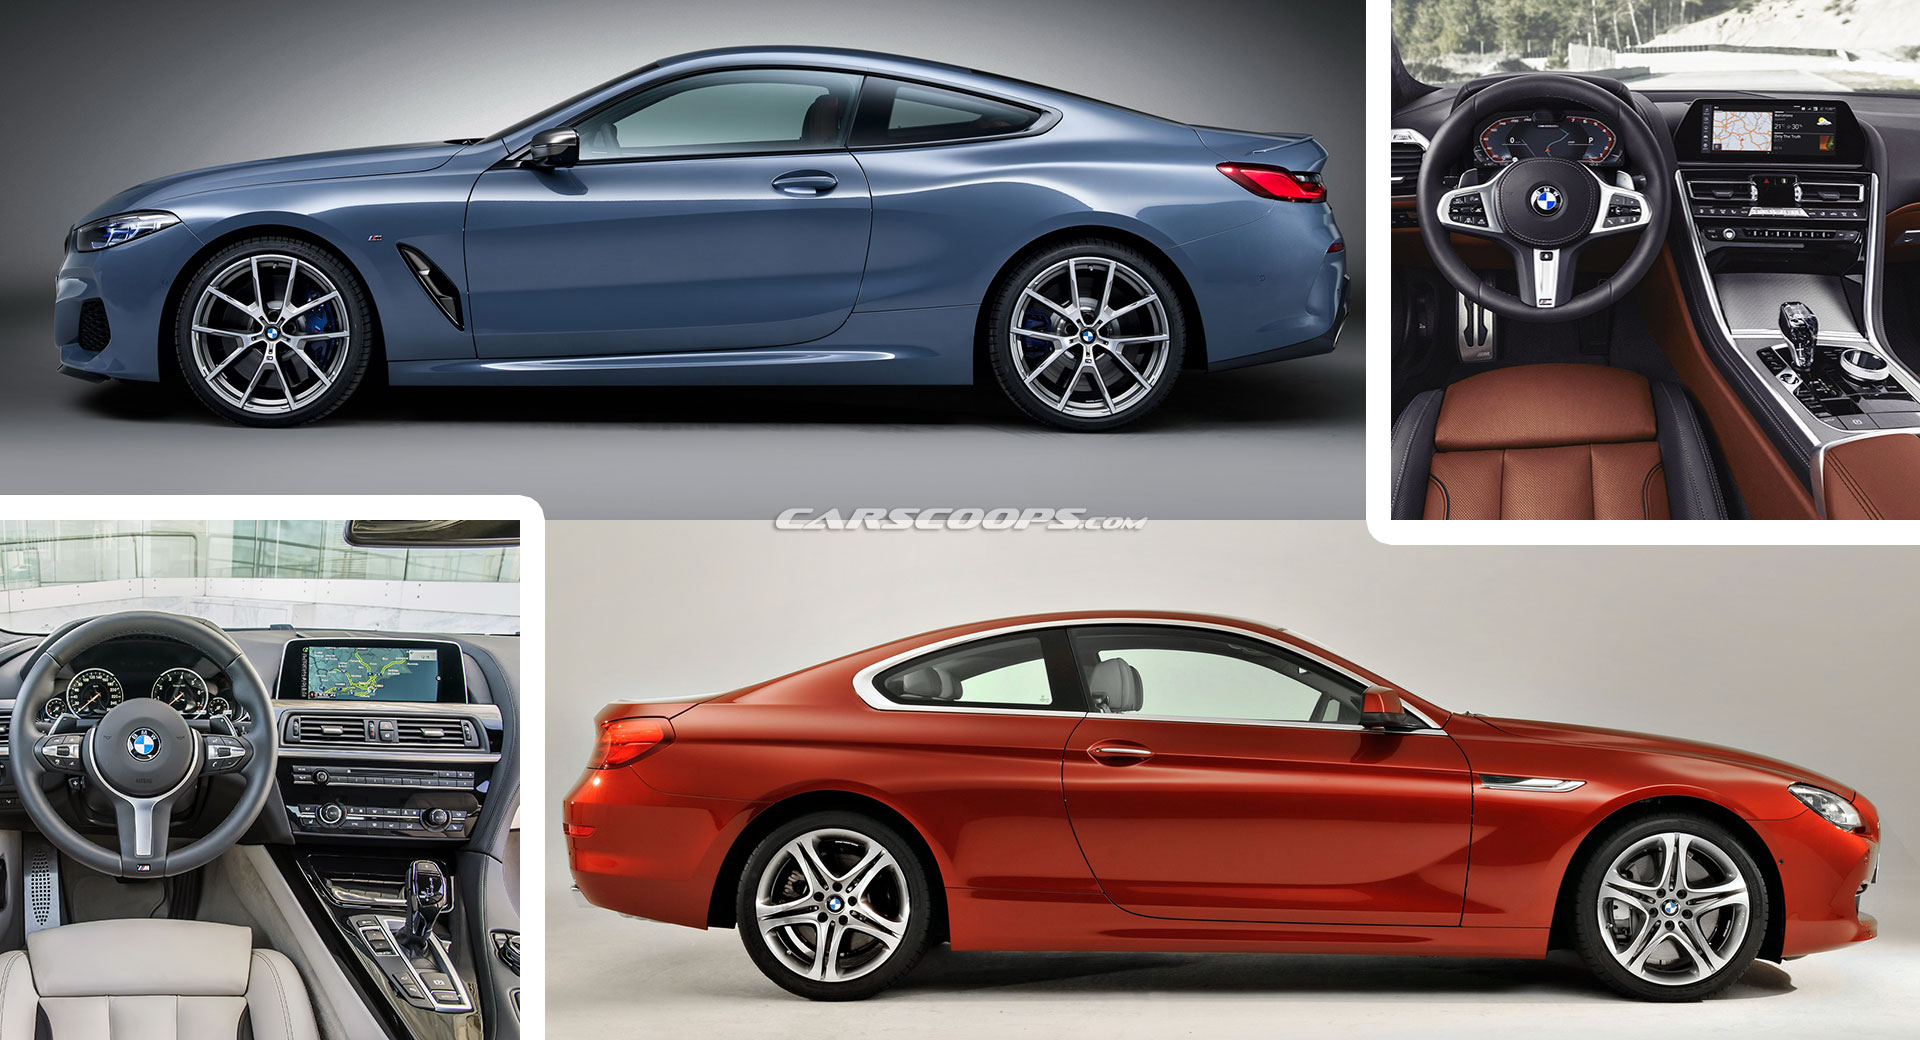 Design: How Does The New BMW 8-Series Compare To The 6-Series? | Carscoops